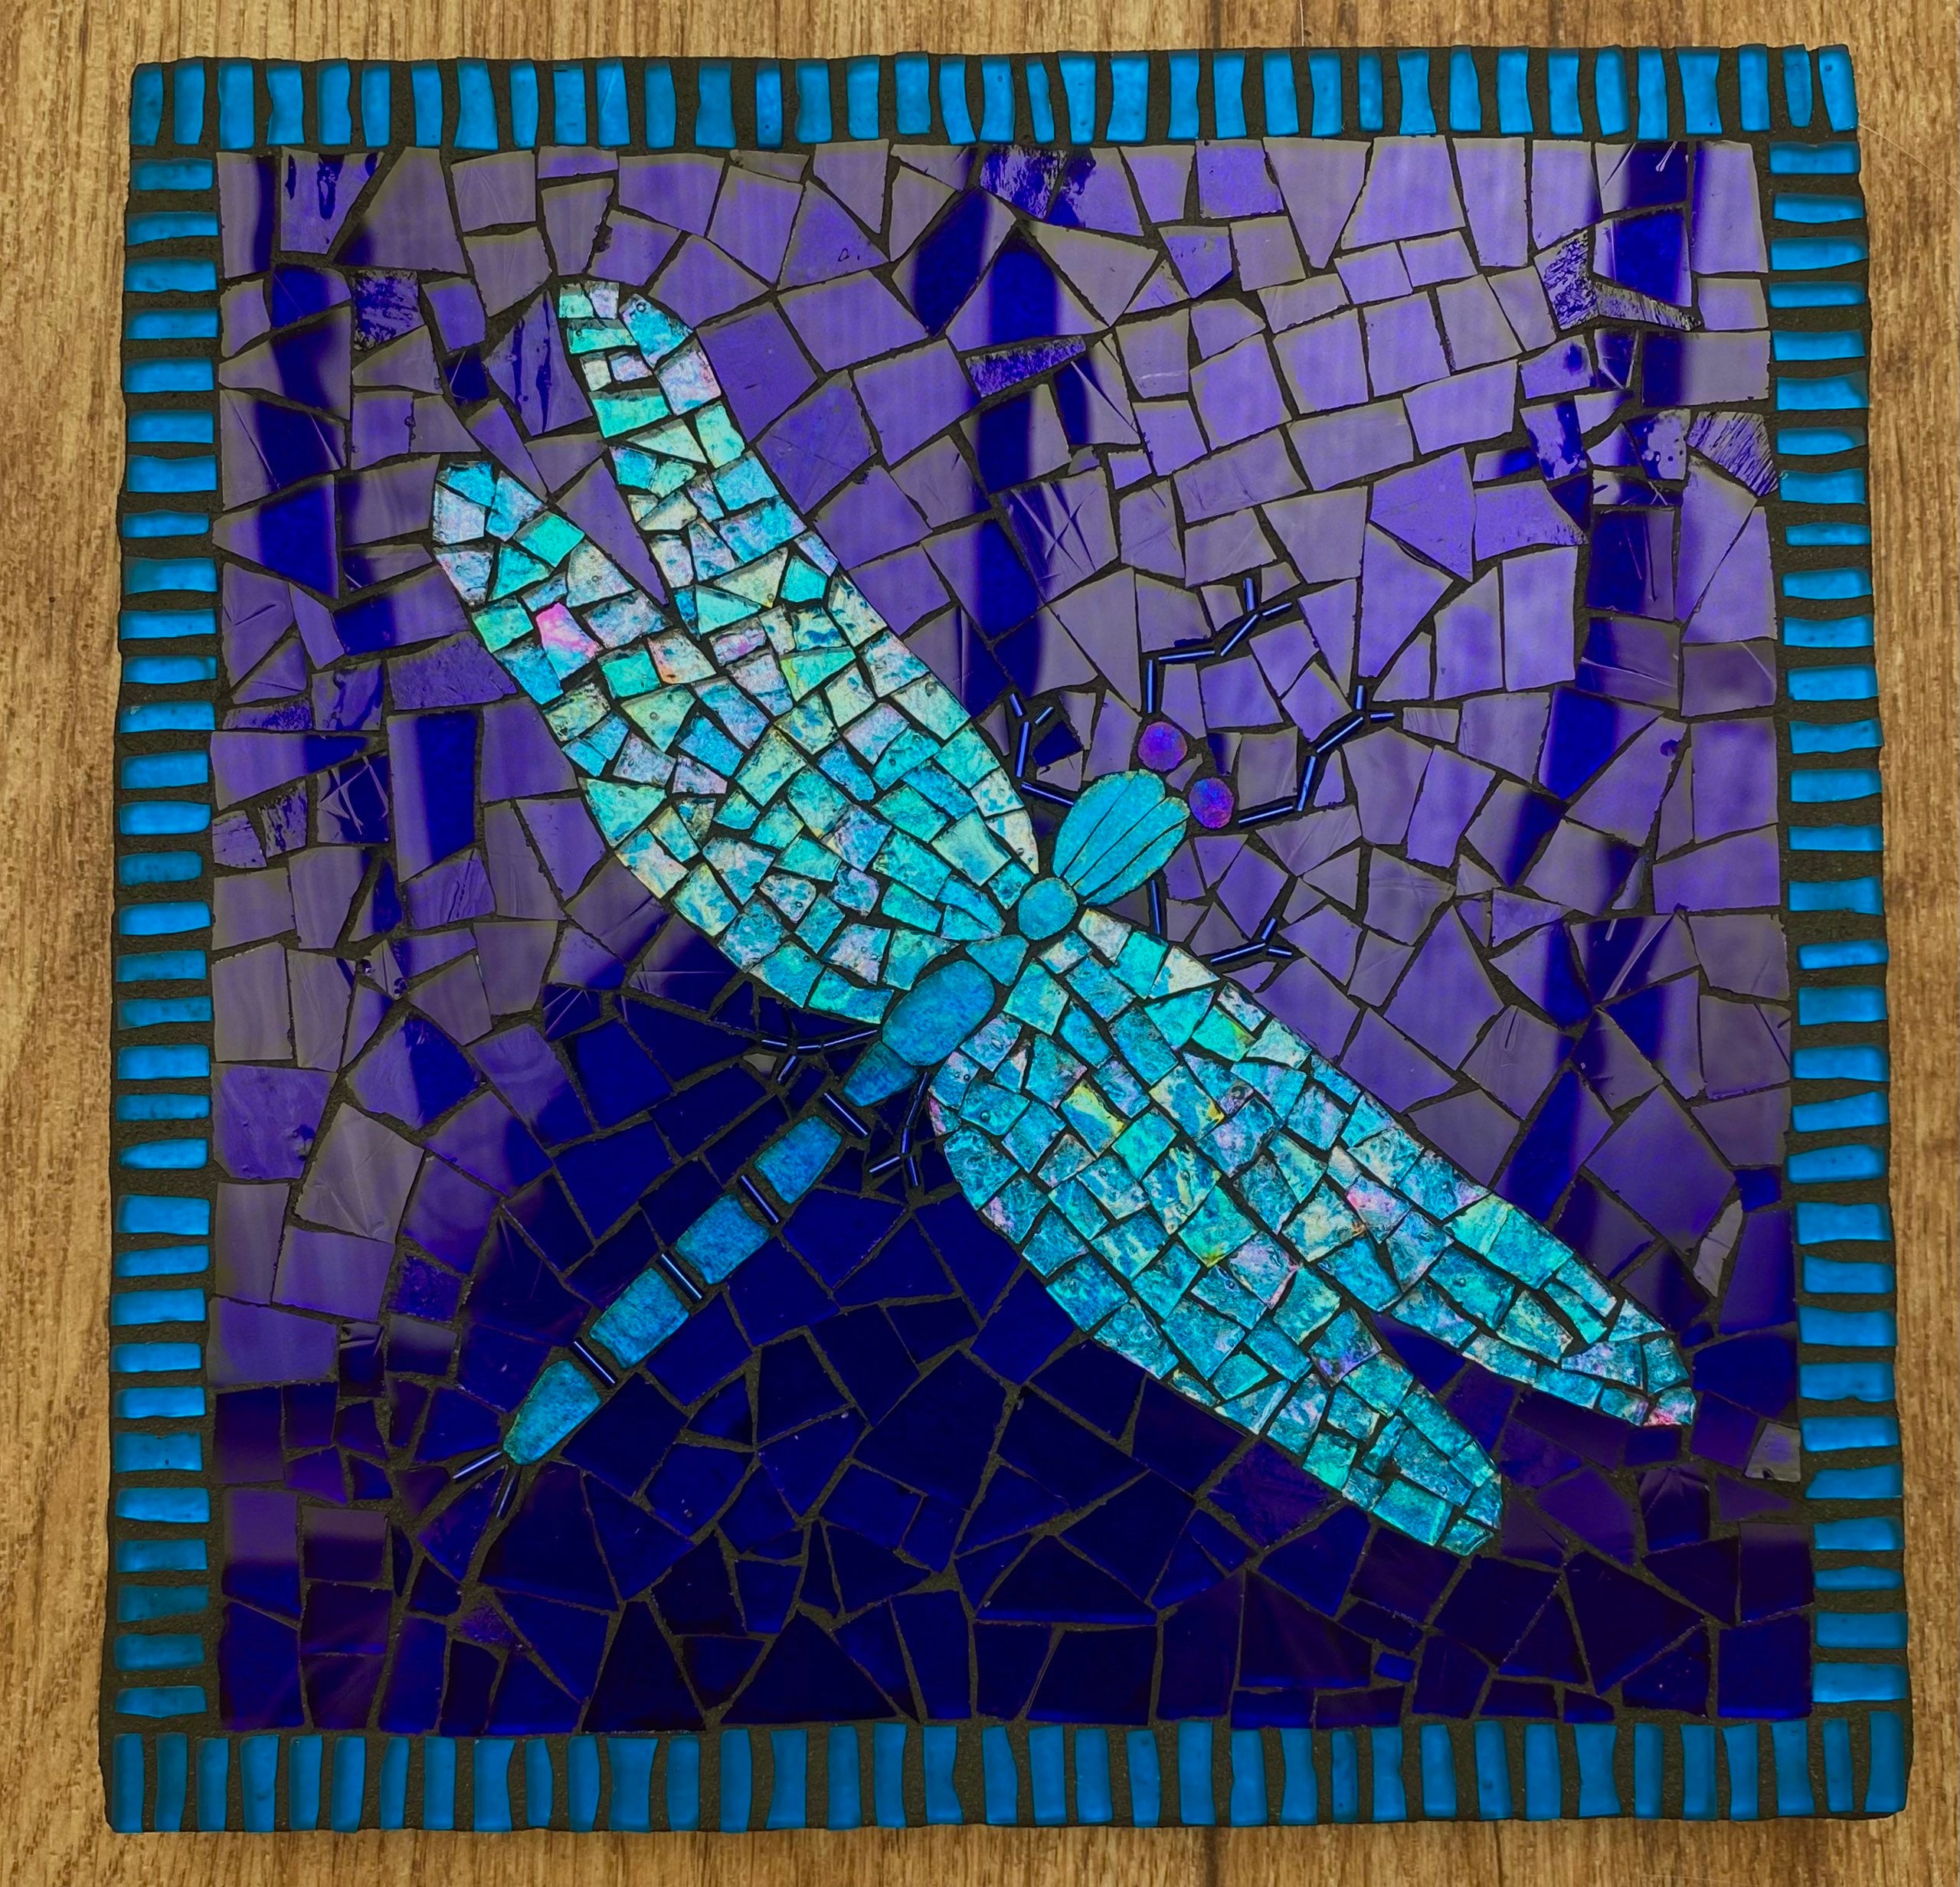 Dragonfly Diamond Art Kit, Faux Stained Glass Diamond Art, Diamond Painting  Kit, Wheat Diamond Art, Gift Idea, Scenic Wall Decor 